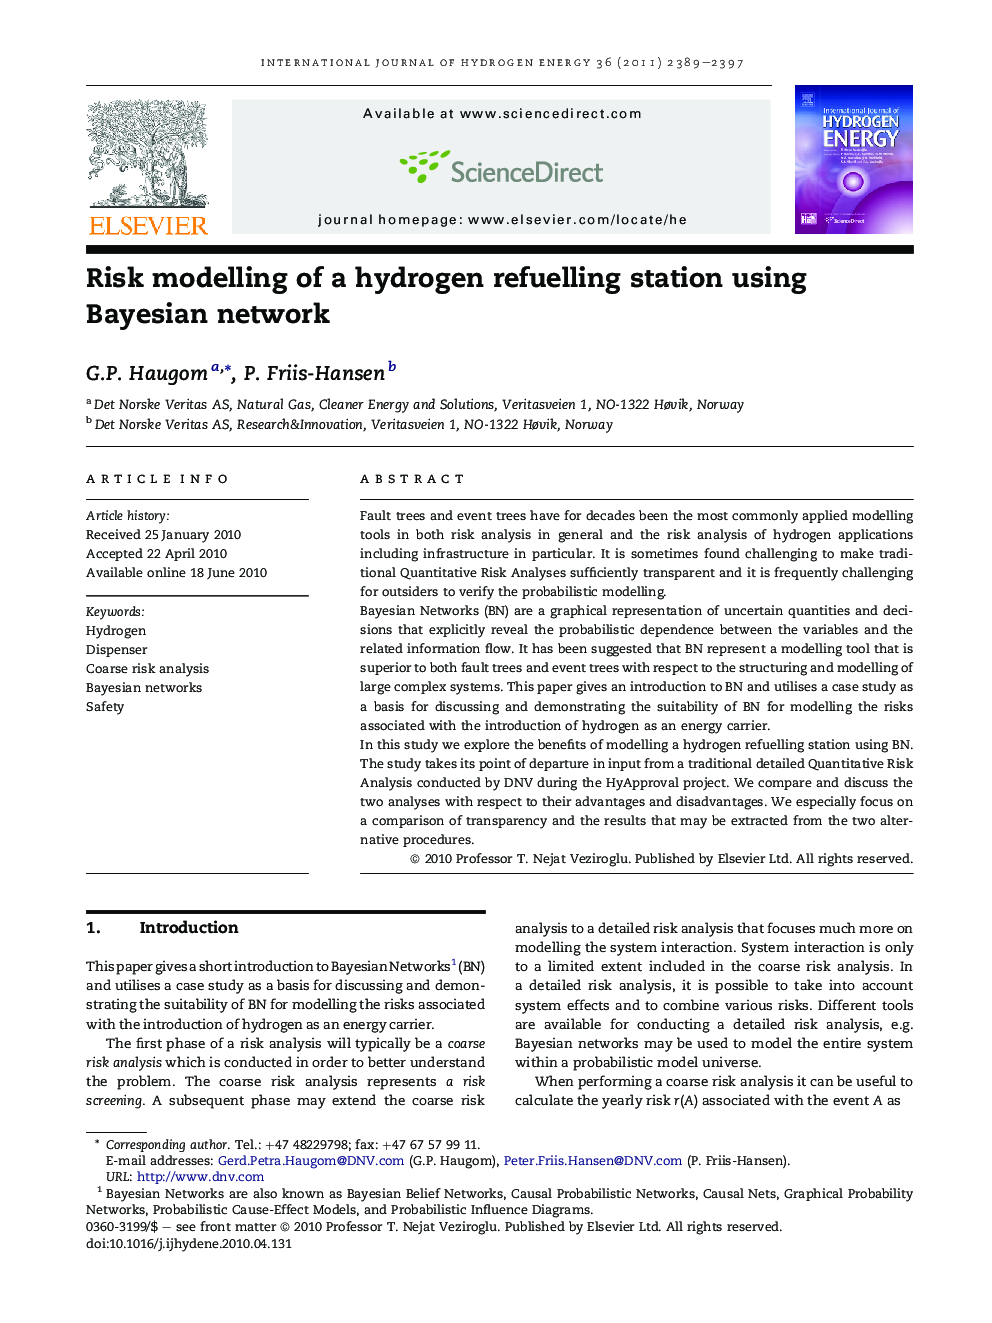 Risk modelling of a hydrogen refuelling station using Bayesian network